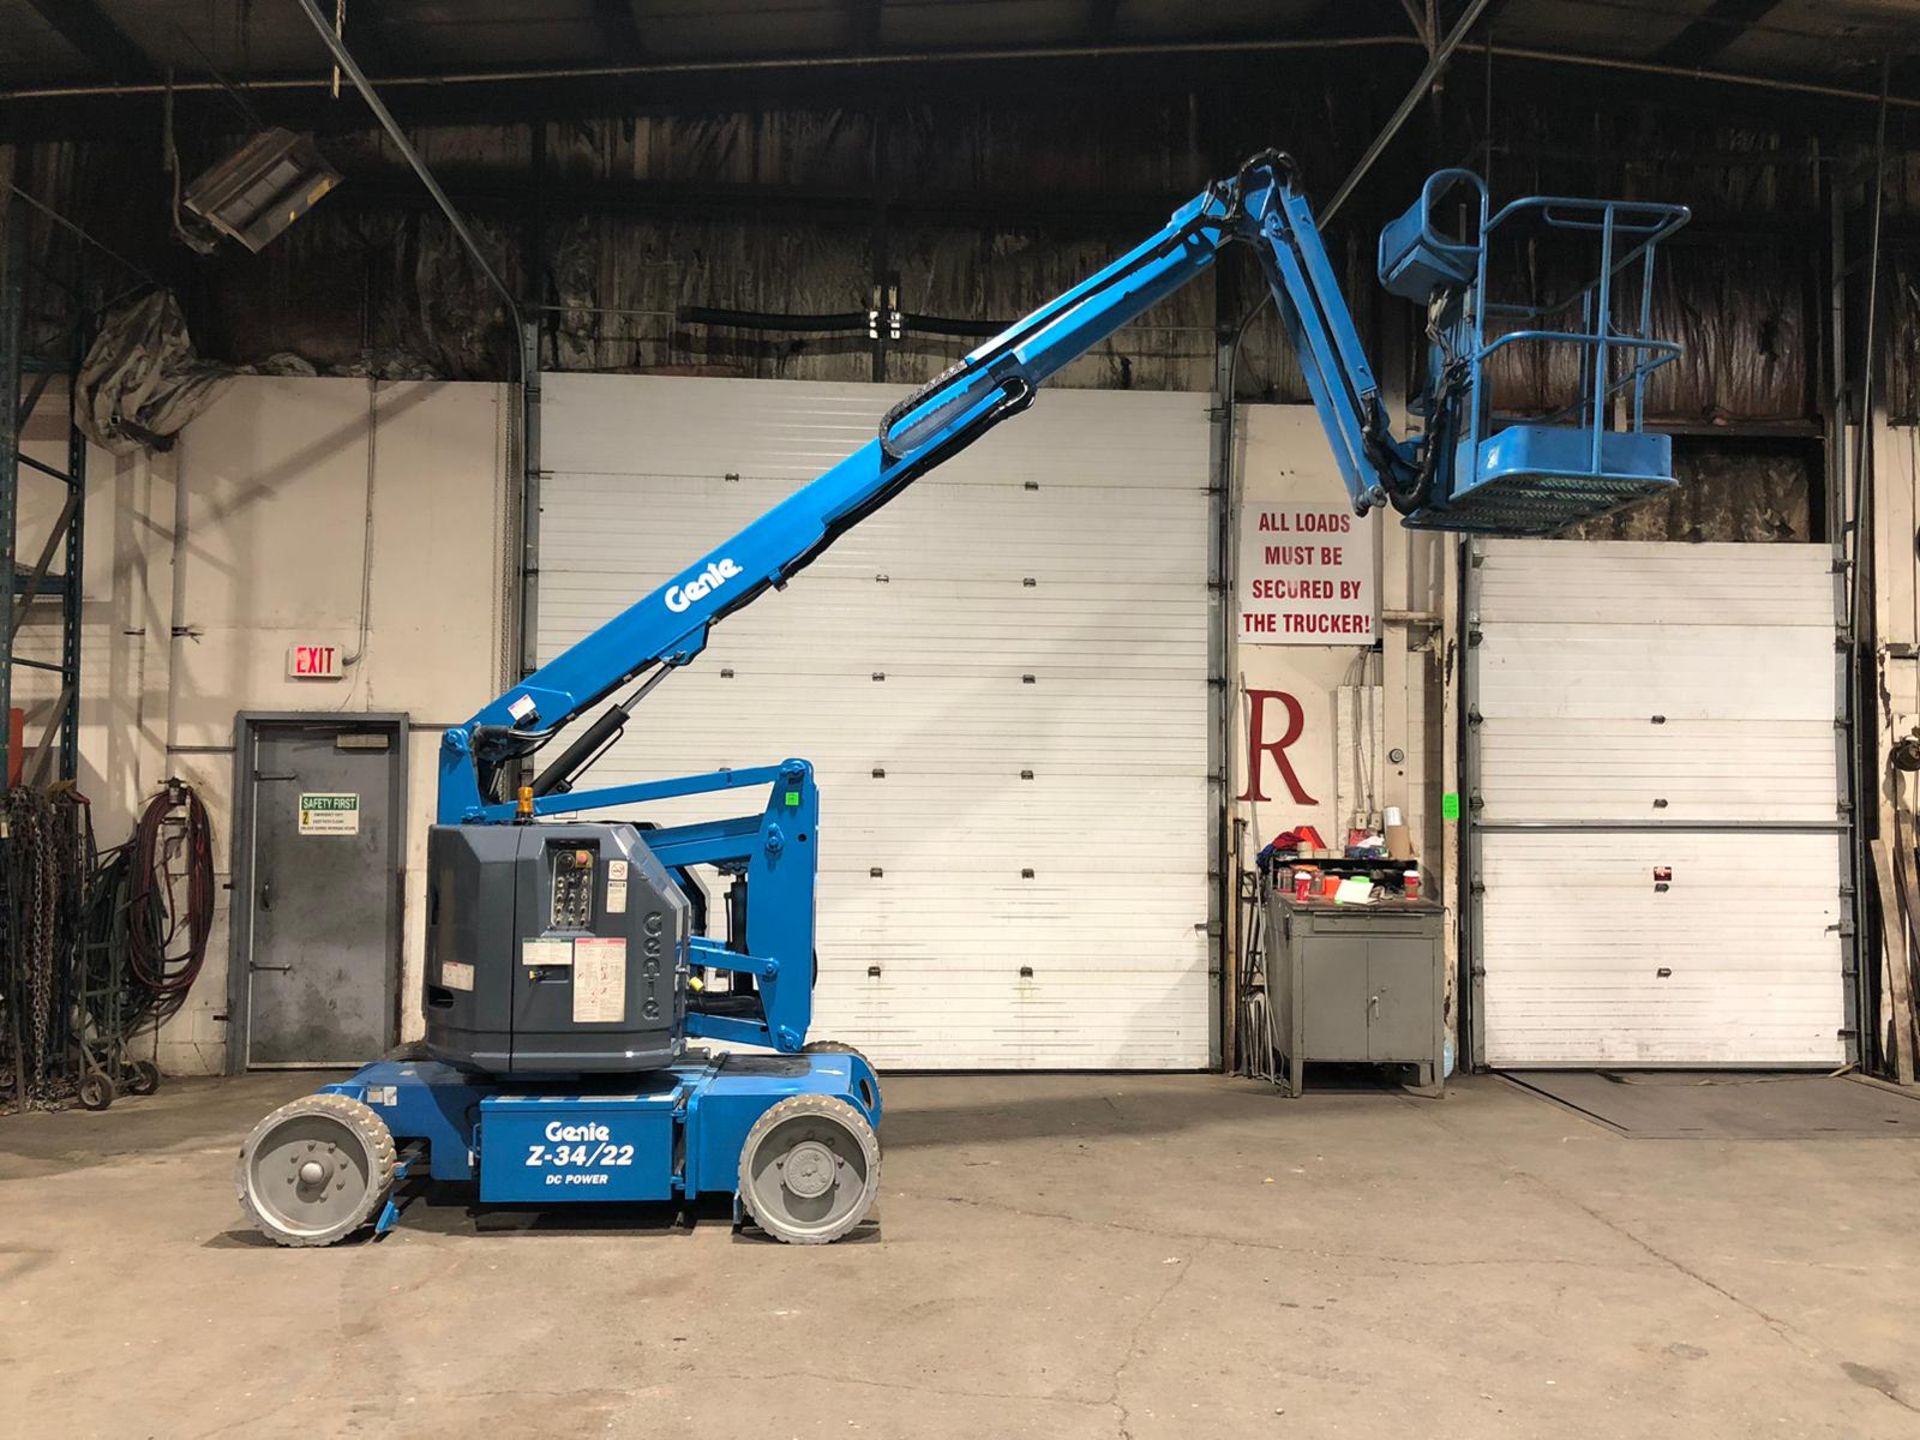 2007 Genie Boom Lift model Z-34/22N with 34' high 500lbs Lift Capacity with VERY LOW hours ELECTRIC